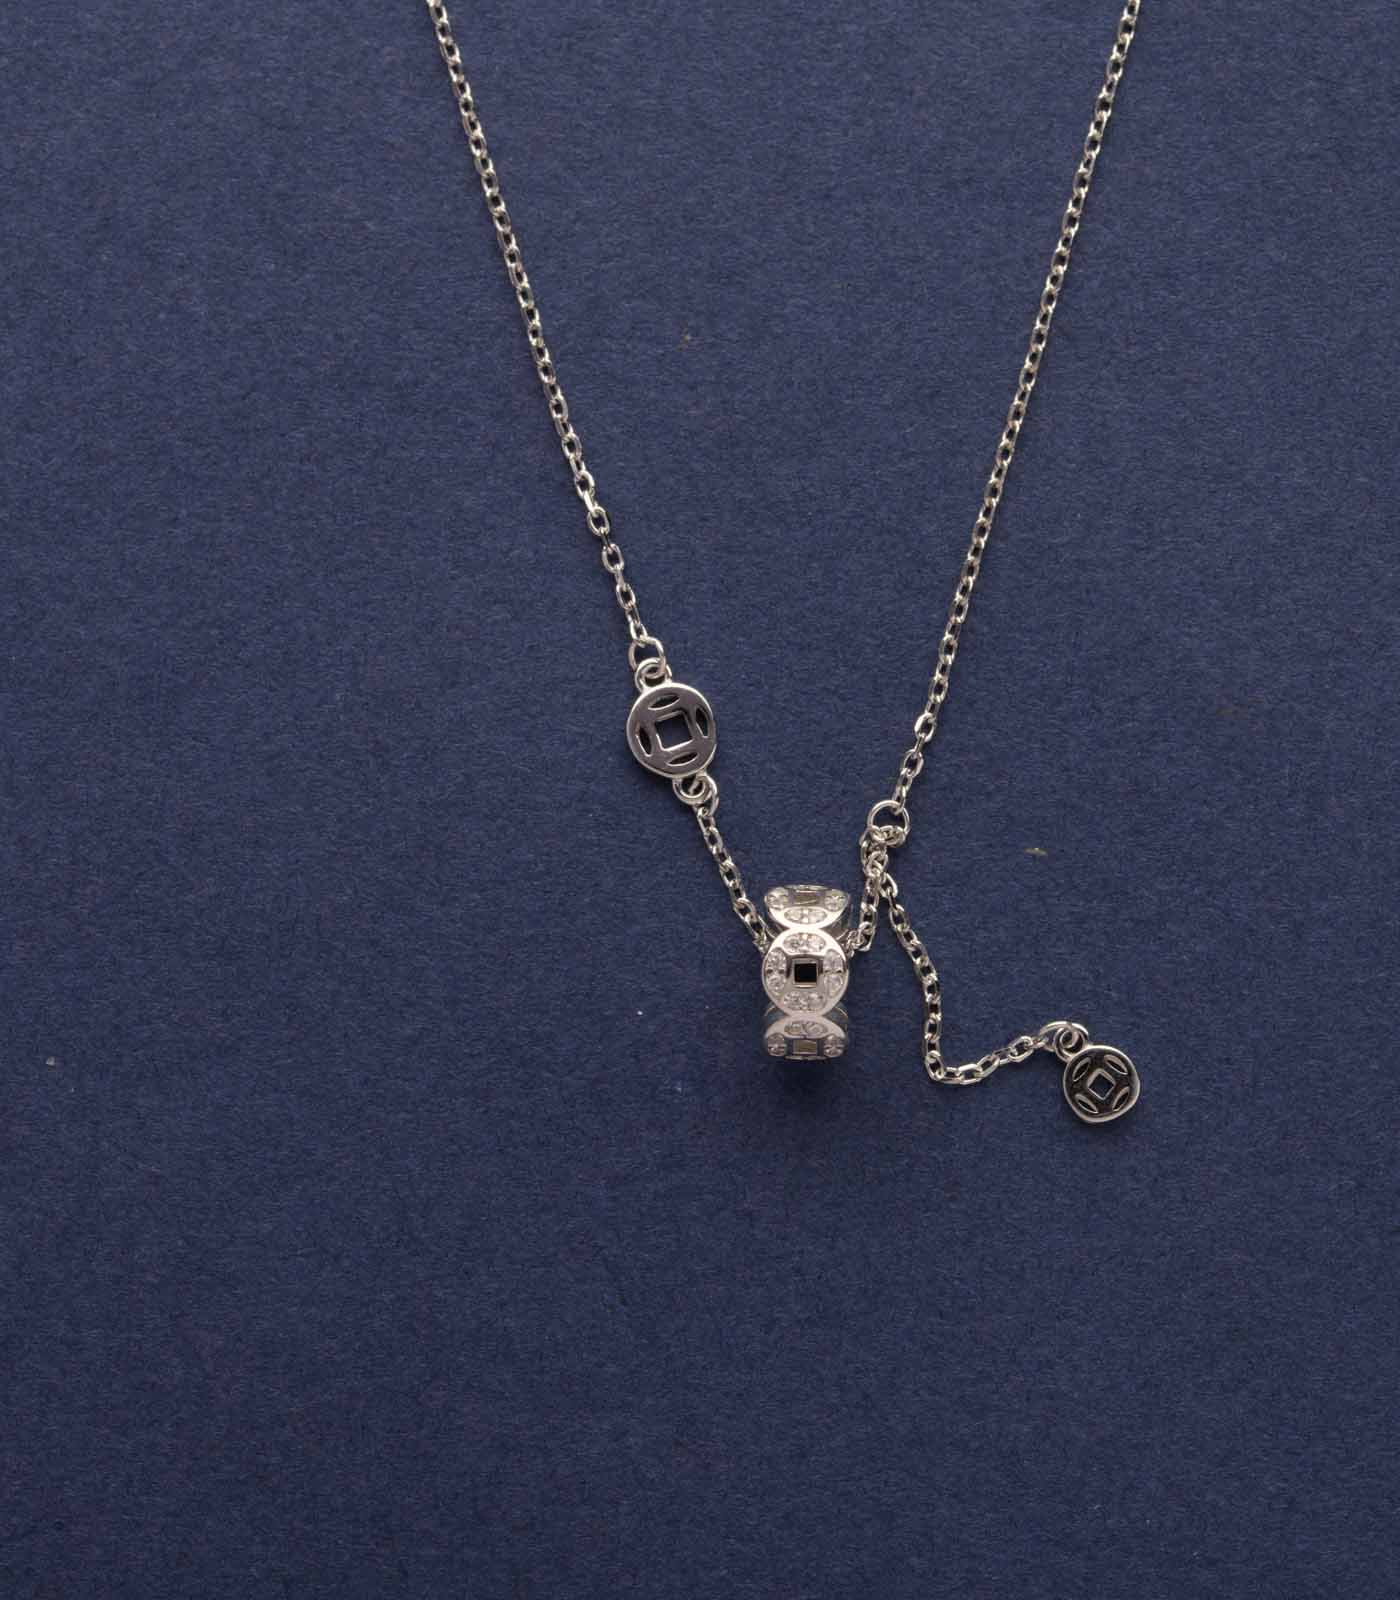 Dangling charm Necklace (Silver)